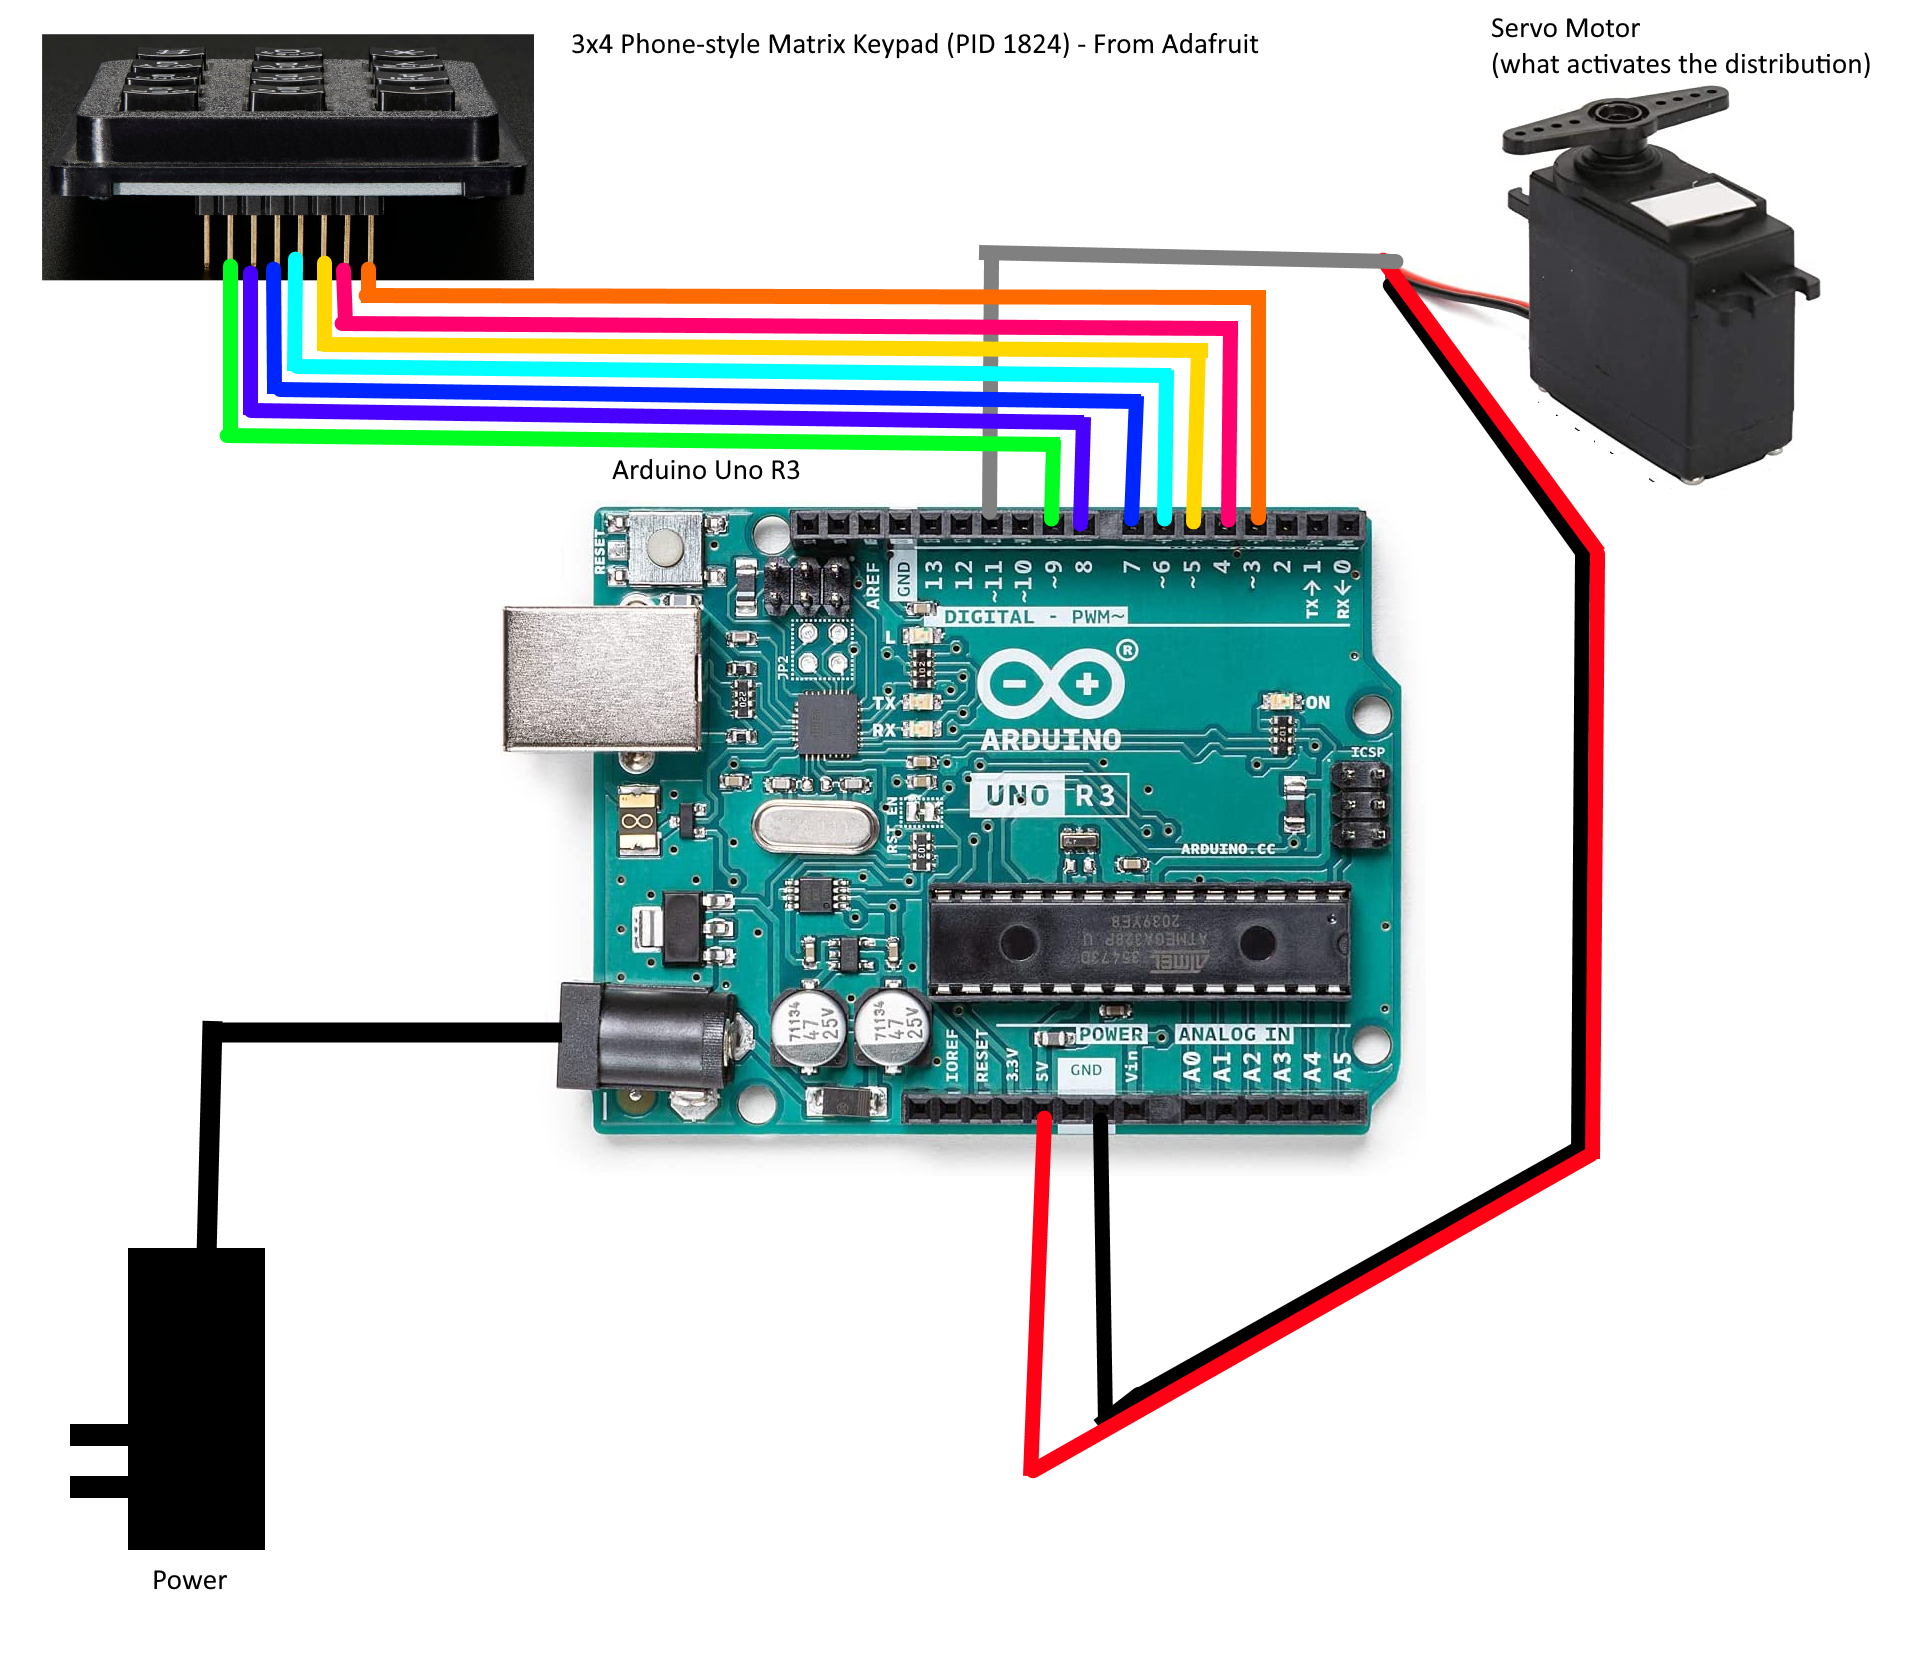 An Arduino UNO R3, with pins D3-D9 connected to a 3x4 matrix keypad, and pin D11 connected to a servo motor